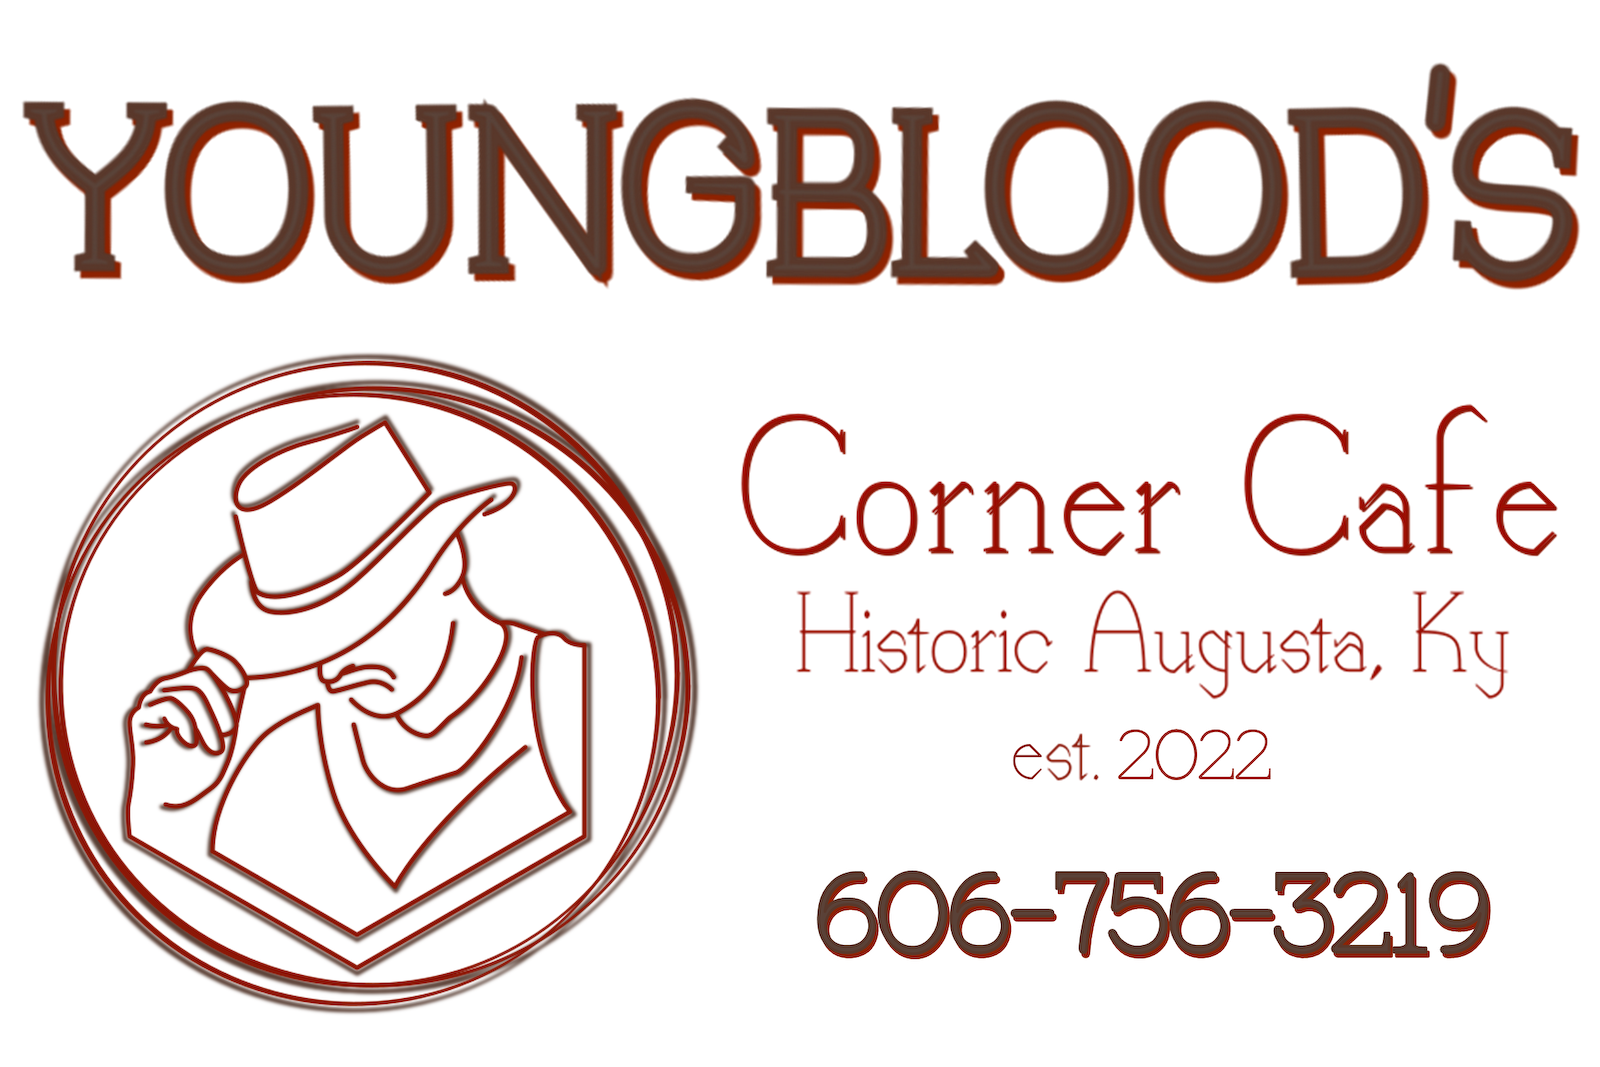 Youngbloods Corner Cafe